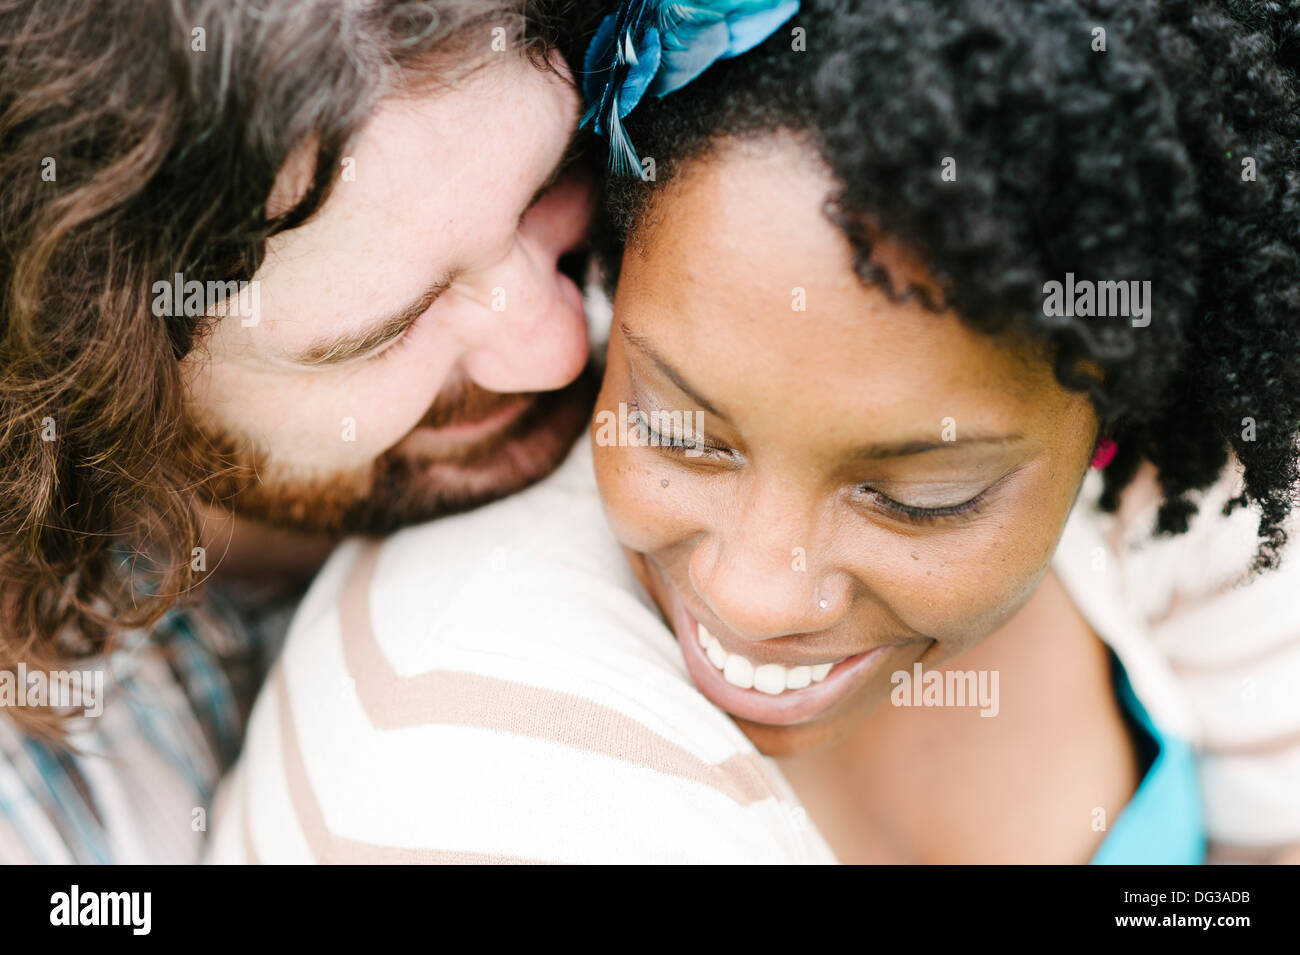 Smiling Interracial Couple, Close Up, High Angle View Stock Photo